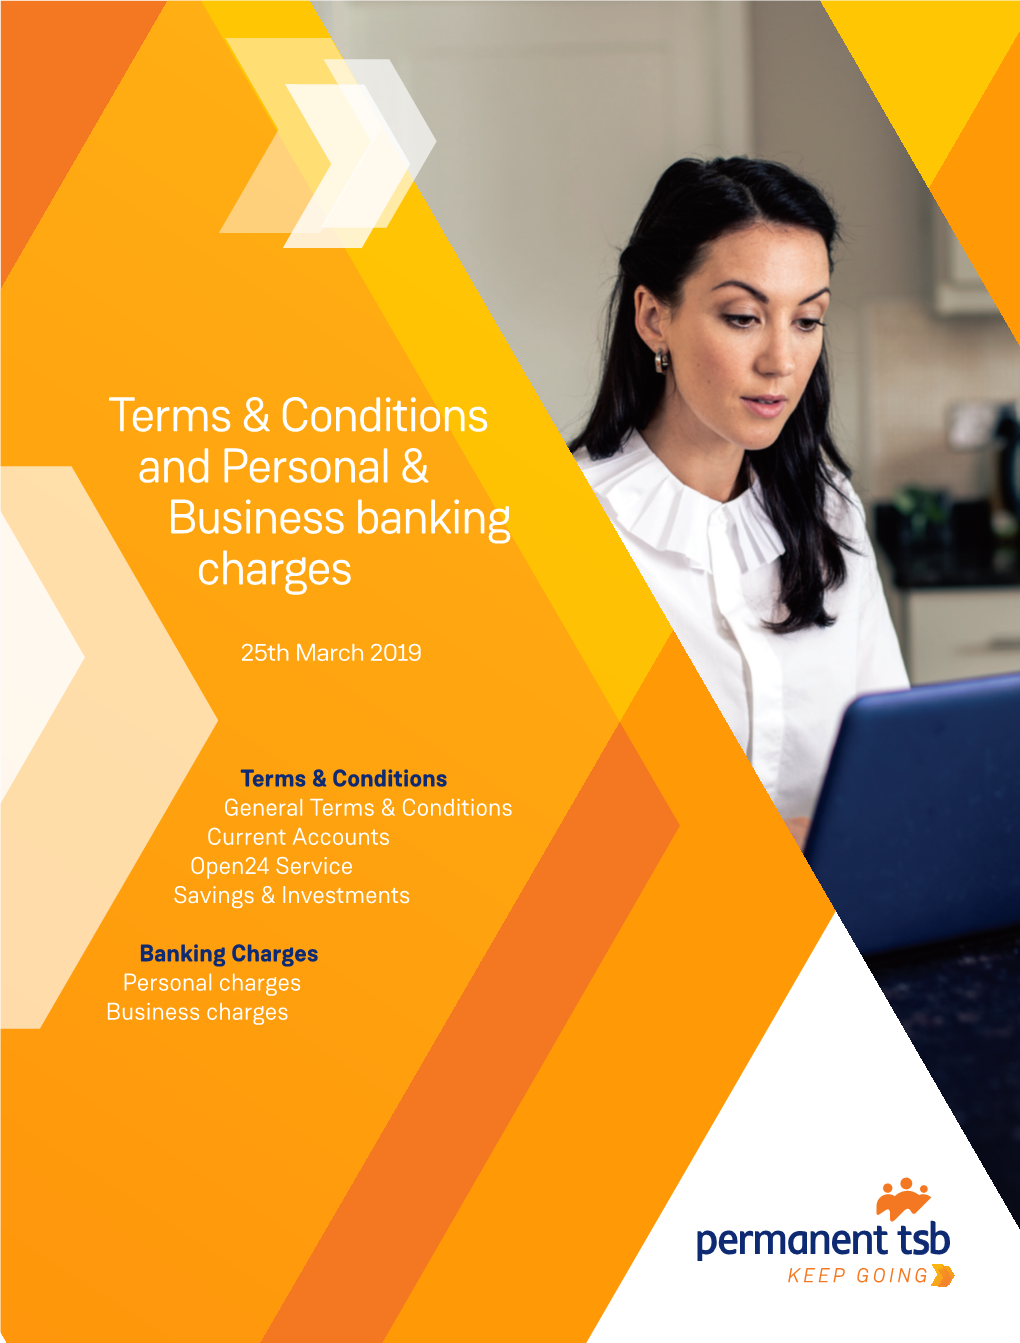 Terms & Conditions and Personal & Business Banking